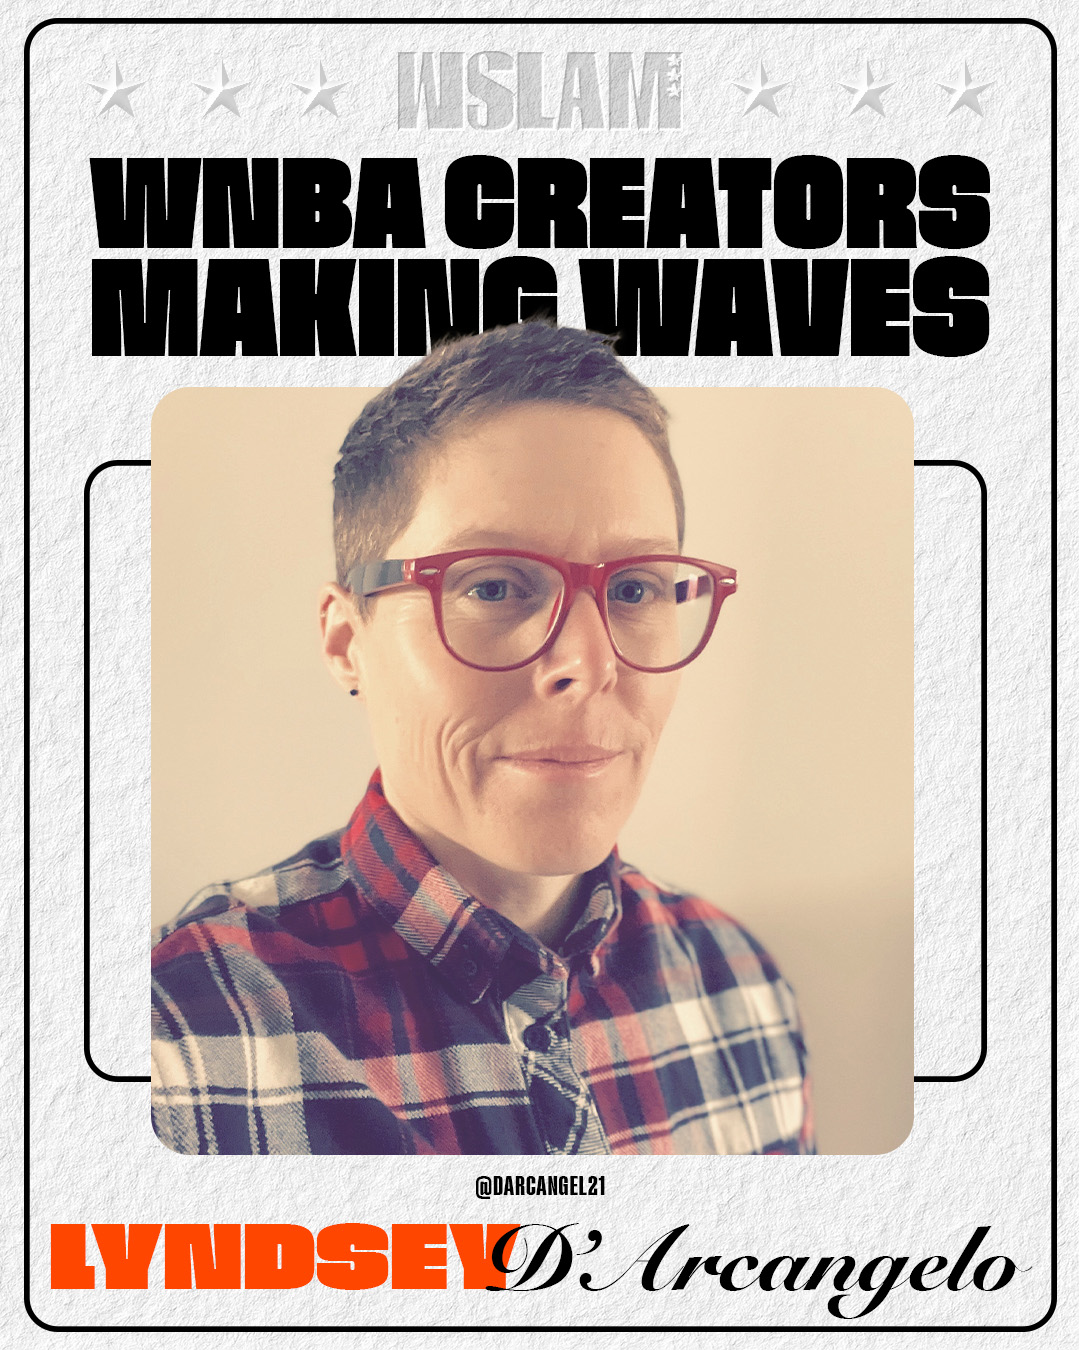 WSLAM Presents: The WNBA Creators, Journalists and Creatives Making Waves and Growing the Game